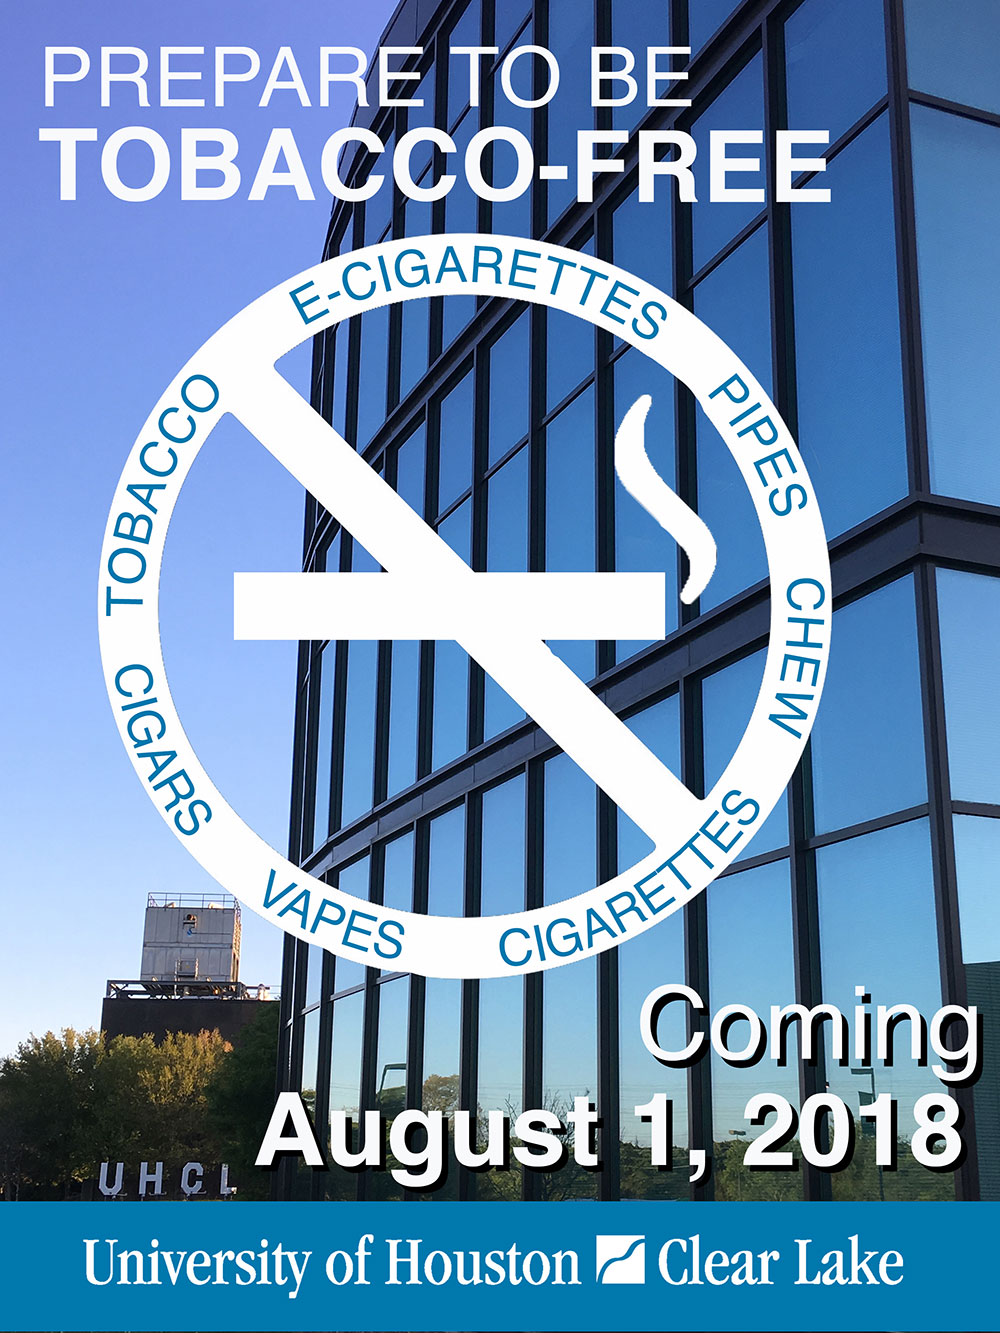 Tobacco free flyer posted around campus. Photo courtesy of Comm 4391 students